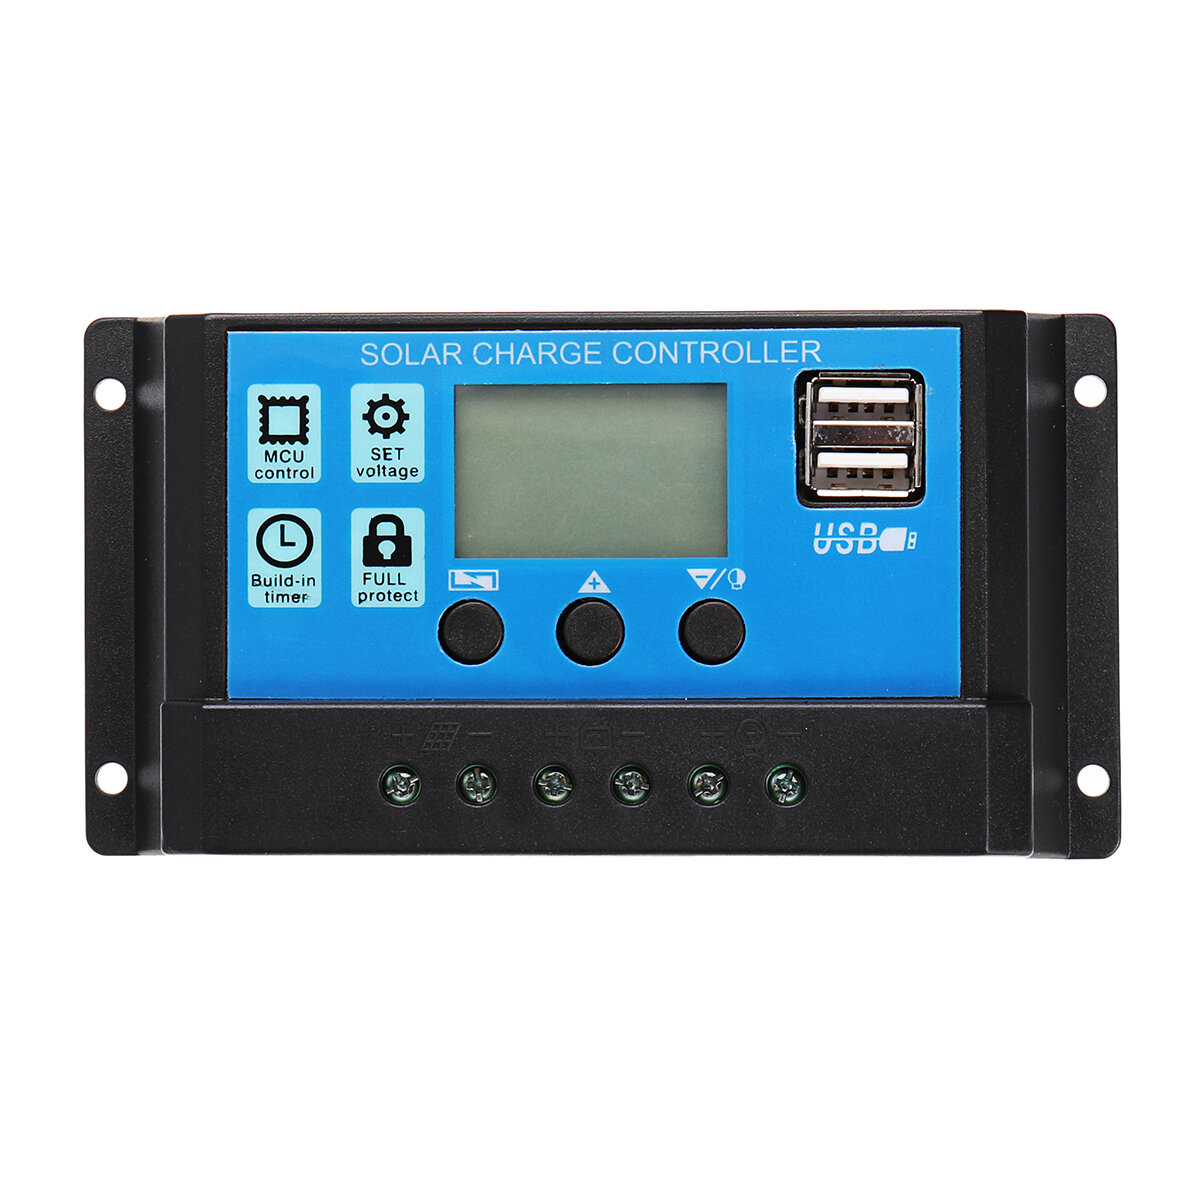 best price,50a,12v-24v,solar,charge,controller,eu,coupon,price,discount